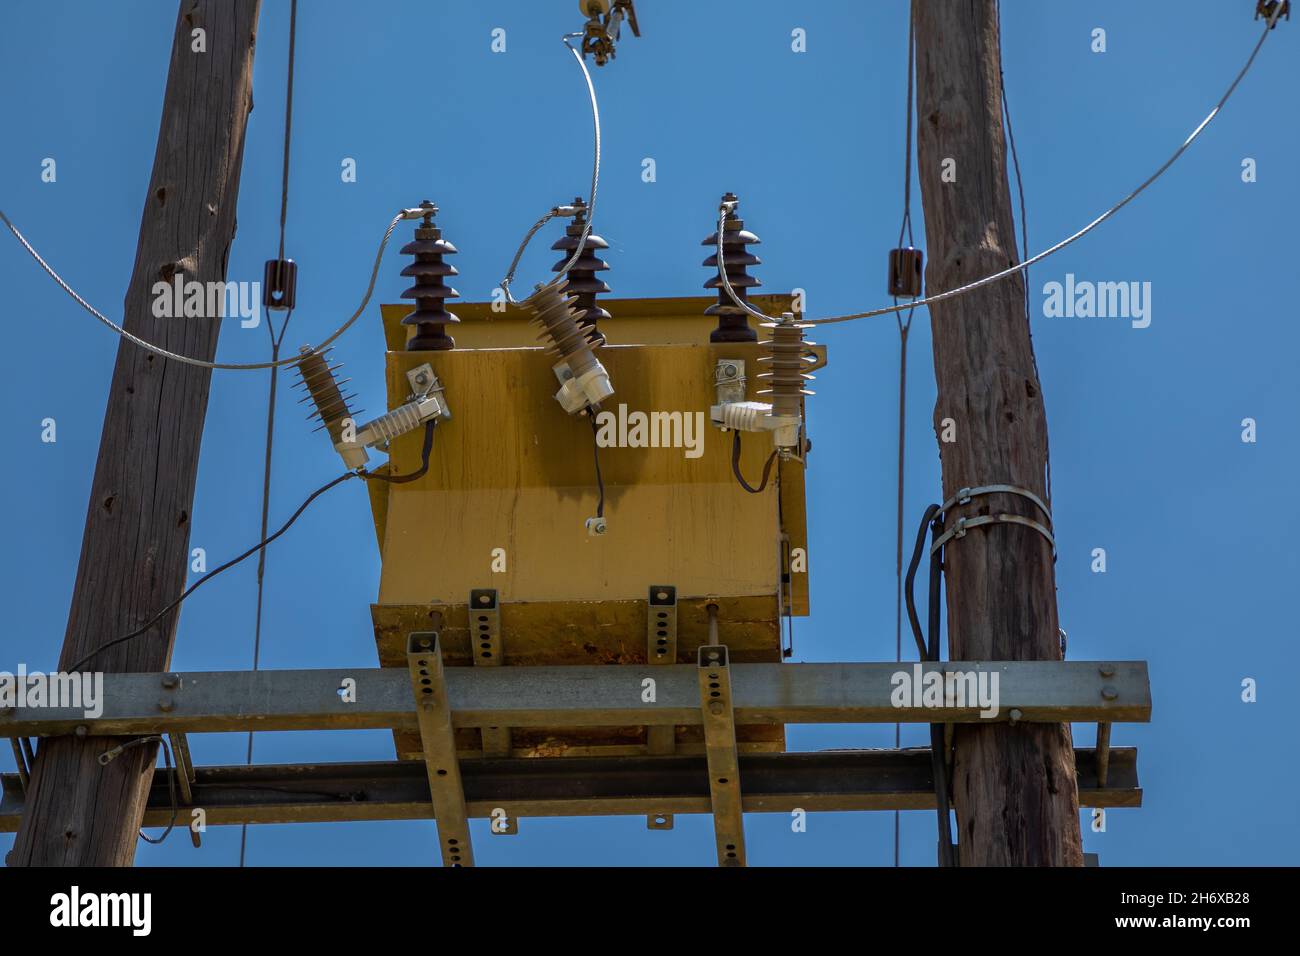 Close up on an old electrical transformer, against the blue sky, build on wooden poles Stock Photo